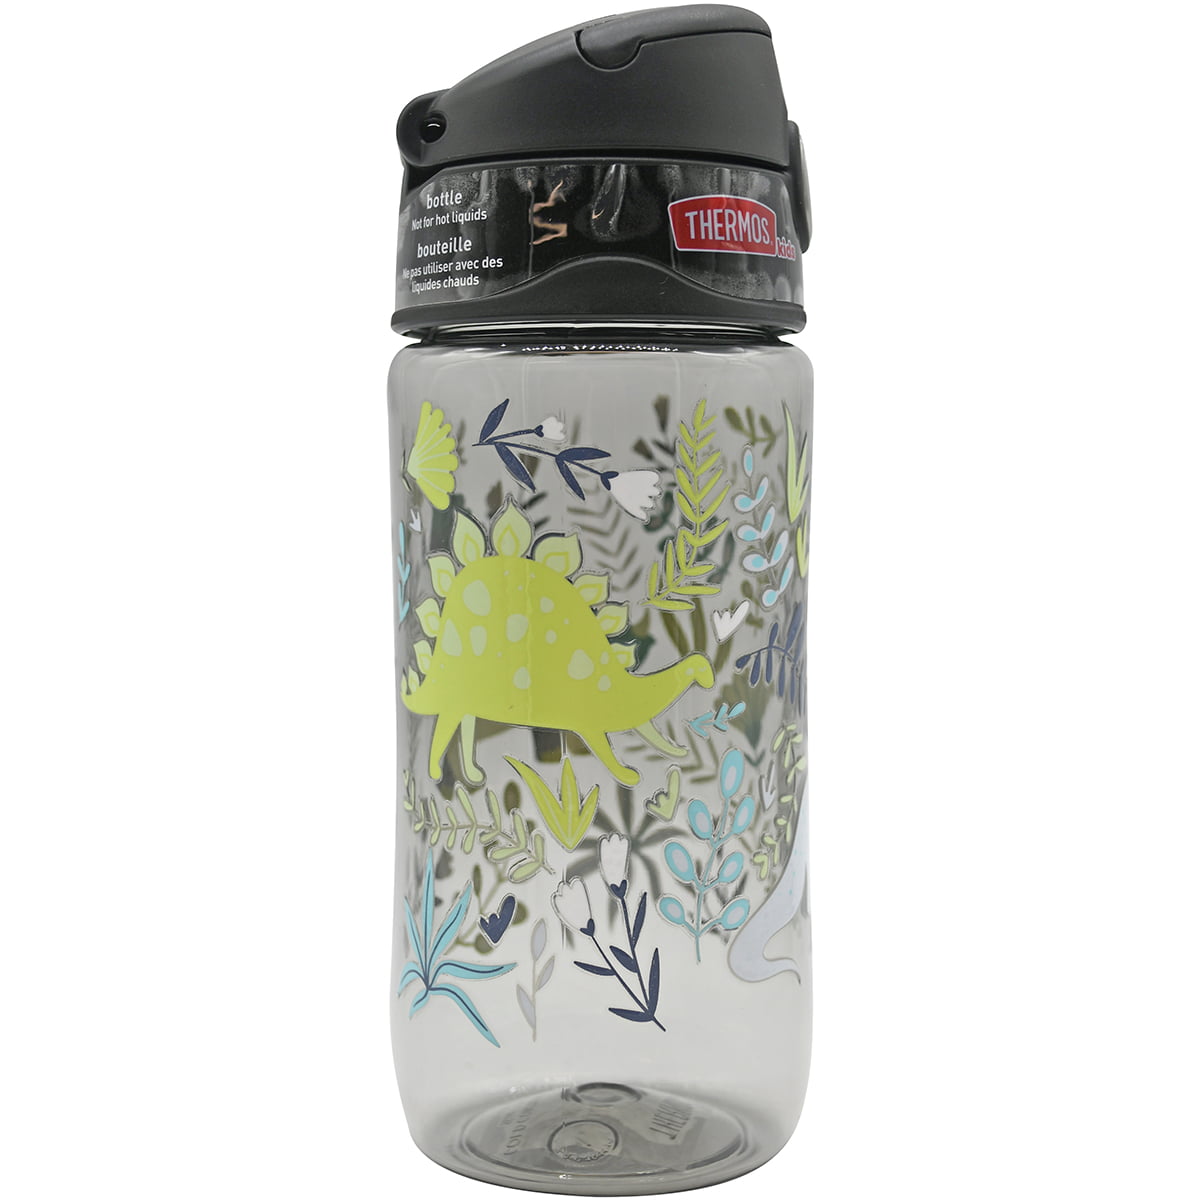 MIRA 15oz Insulated Kids Water Bottle with Straw, One Touch Lid, Stainless  Steel, Dinosaurs